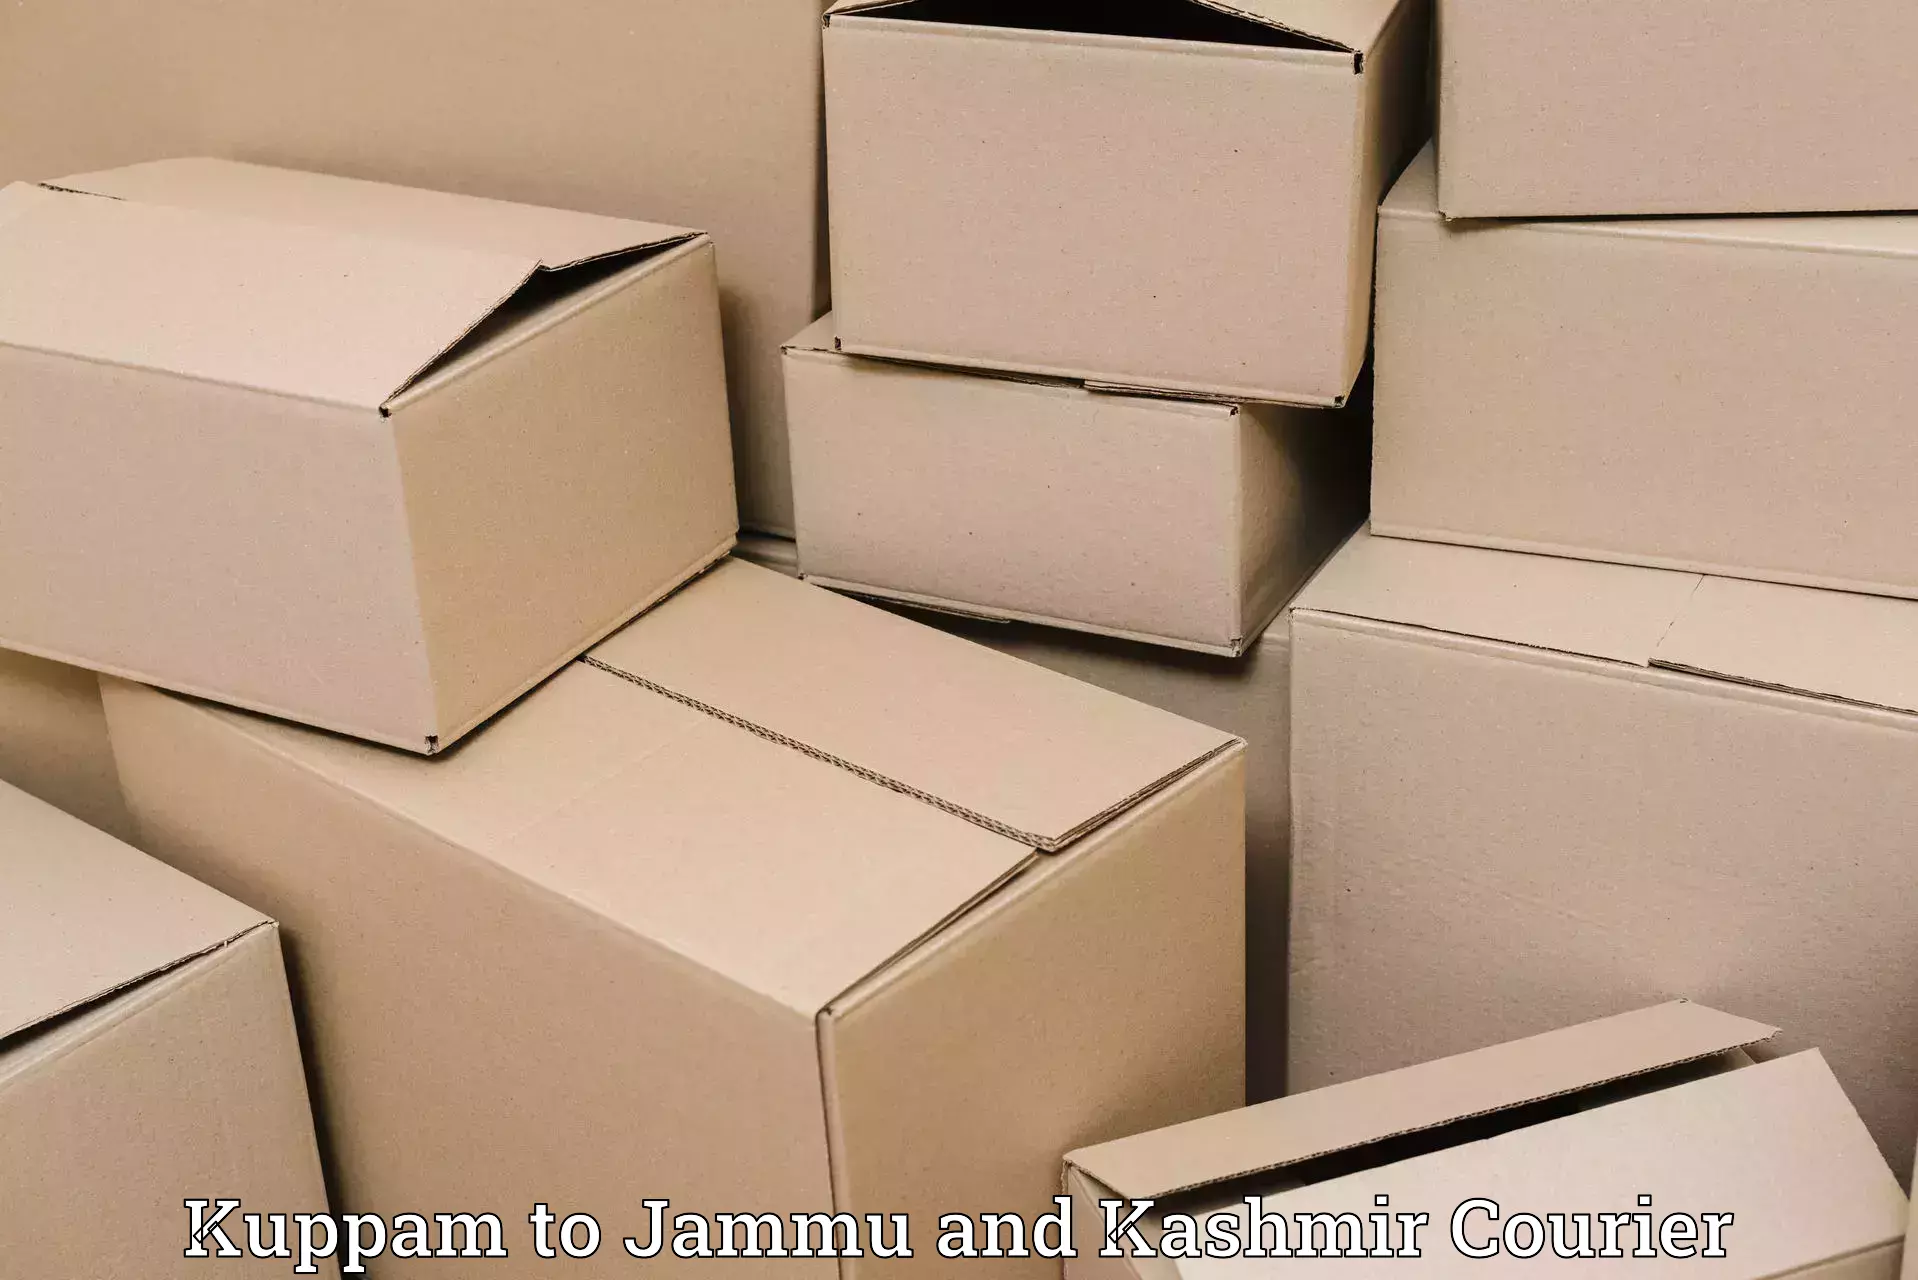 Expedited shipping methods Kuppam to Jammu and Kashmir